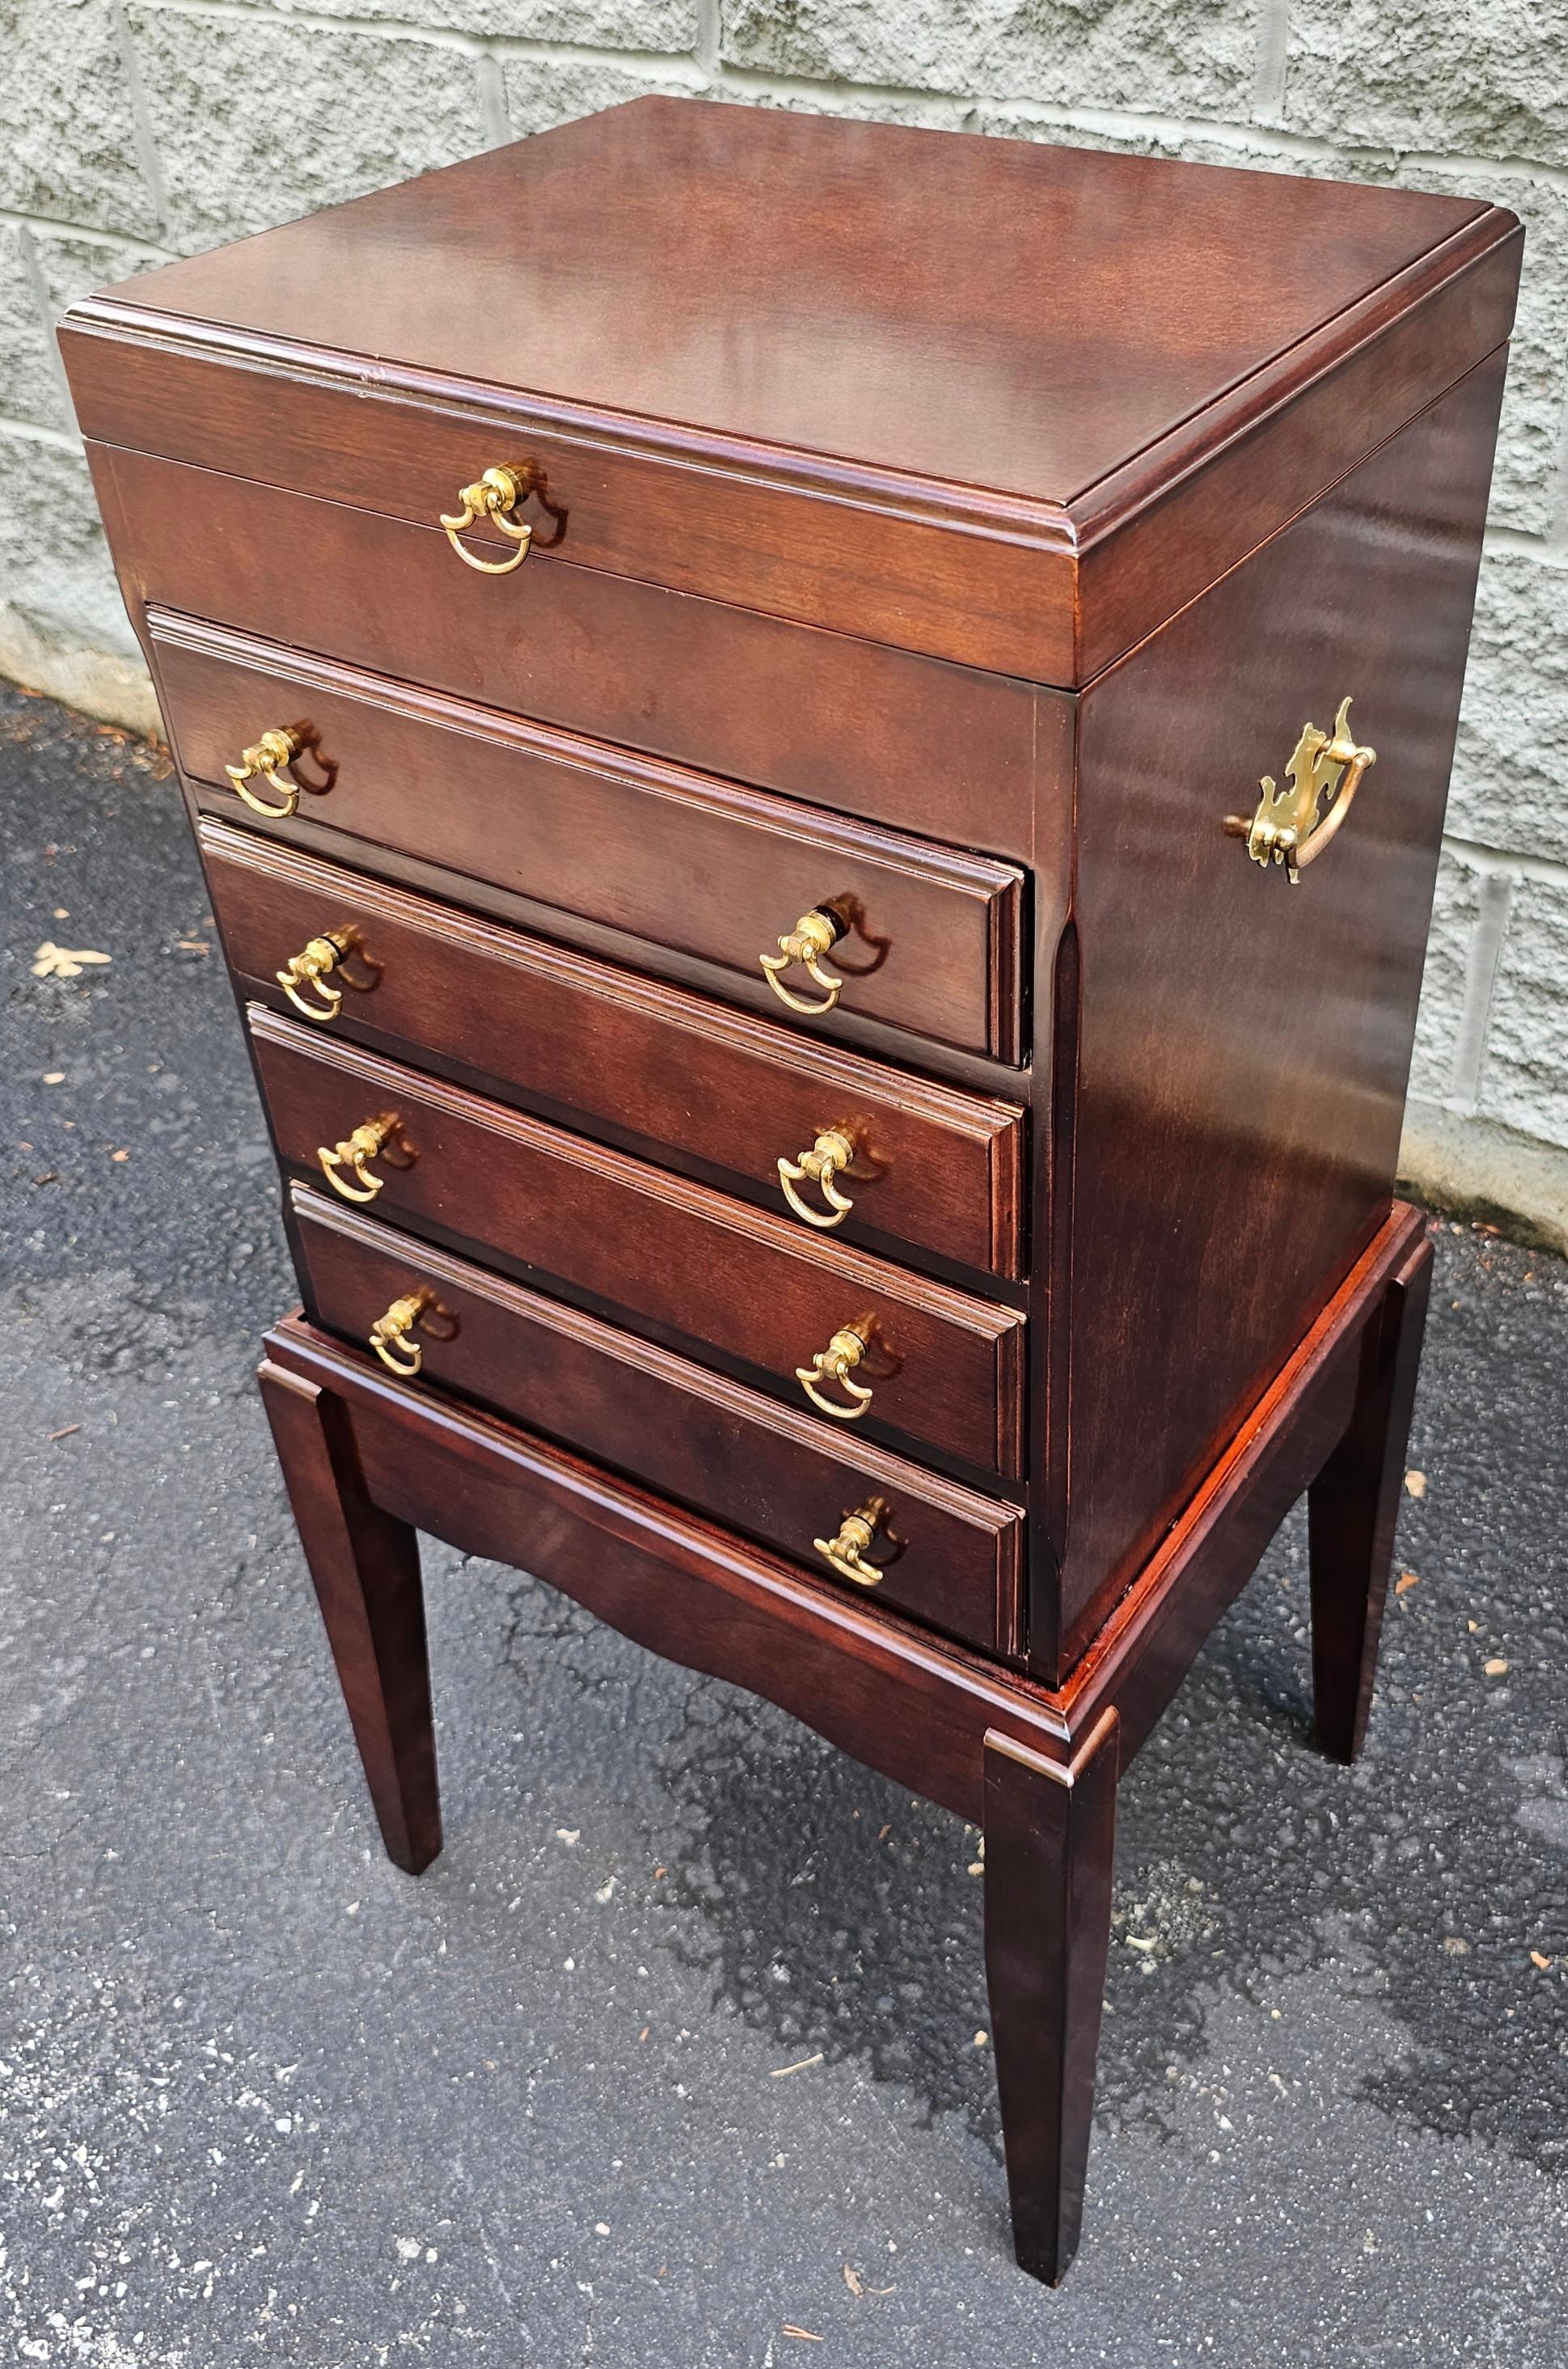 Other Late 20th Century Mahogany Silver Chest on Stand For Sale